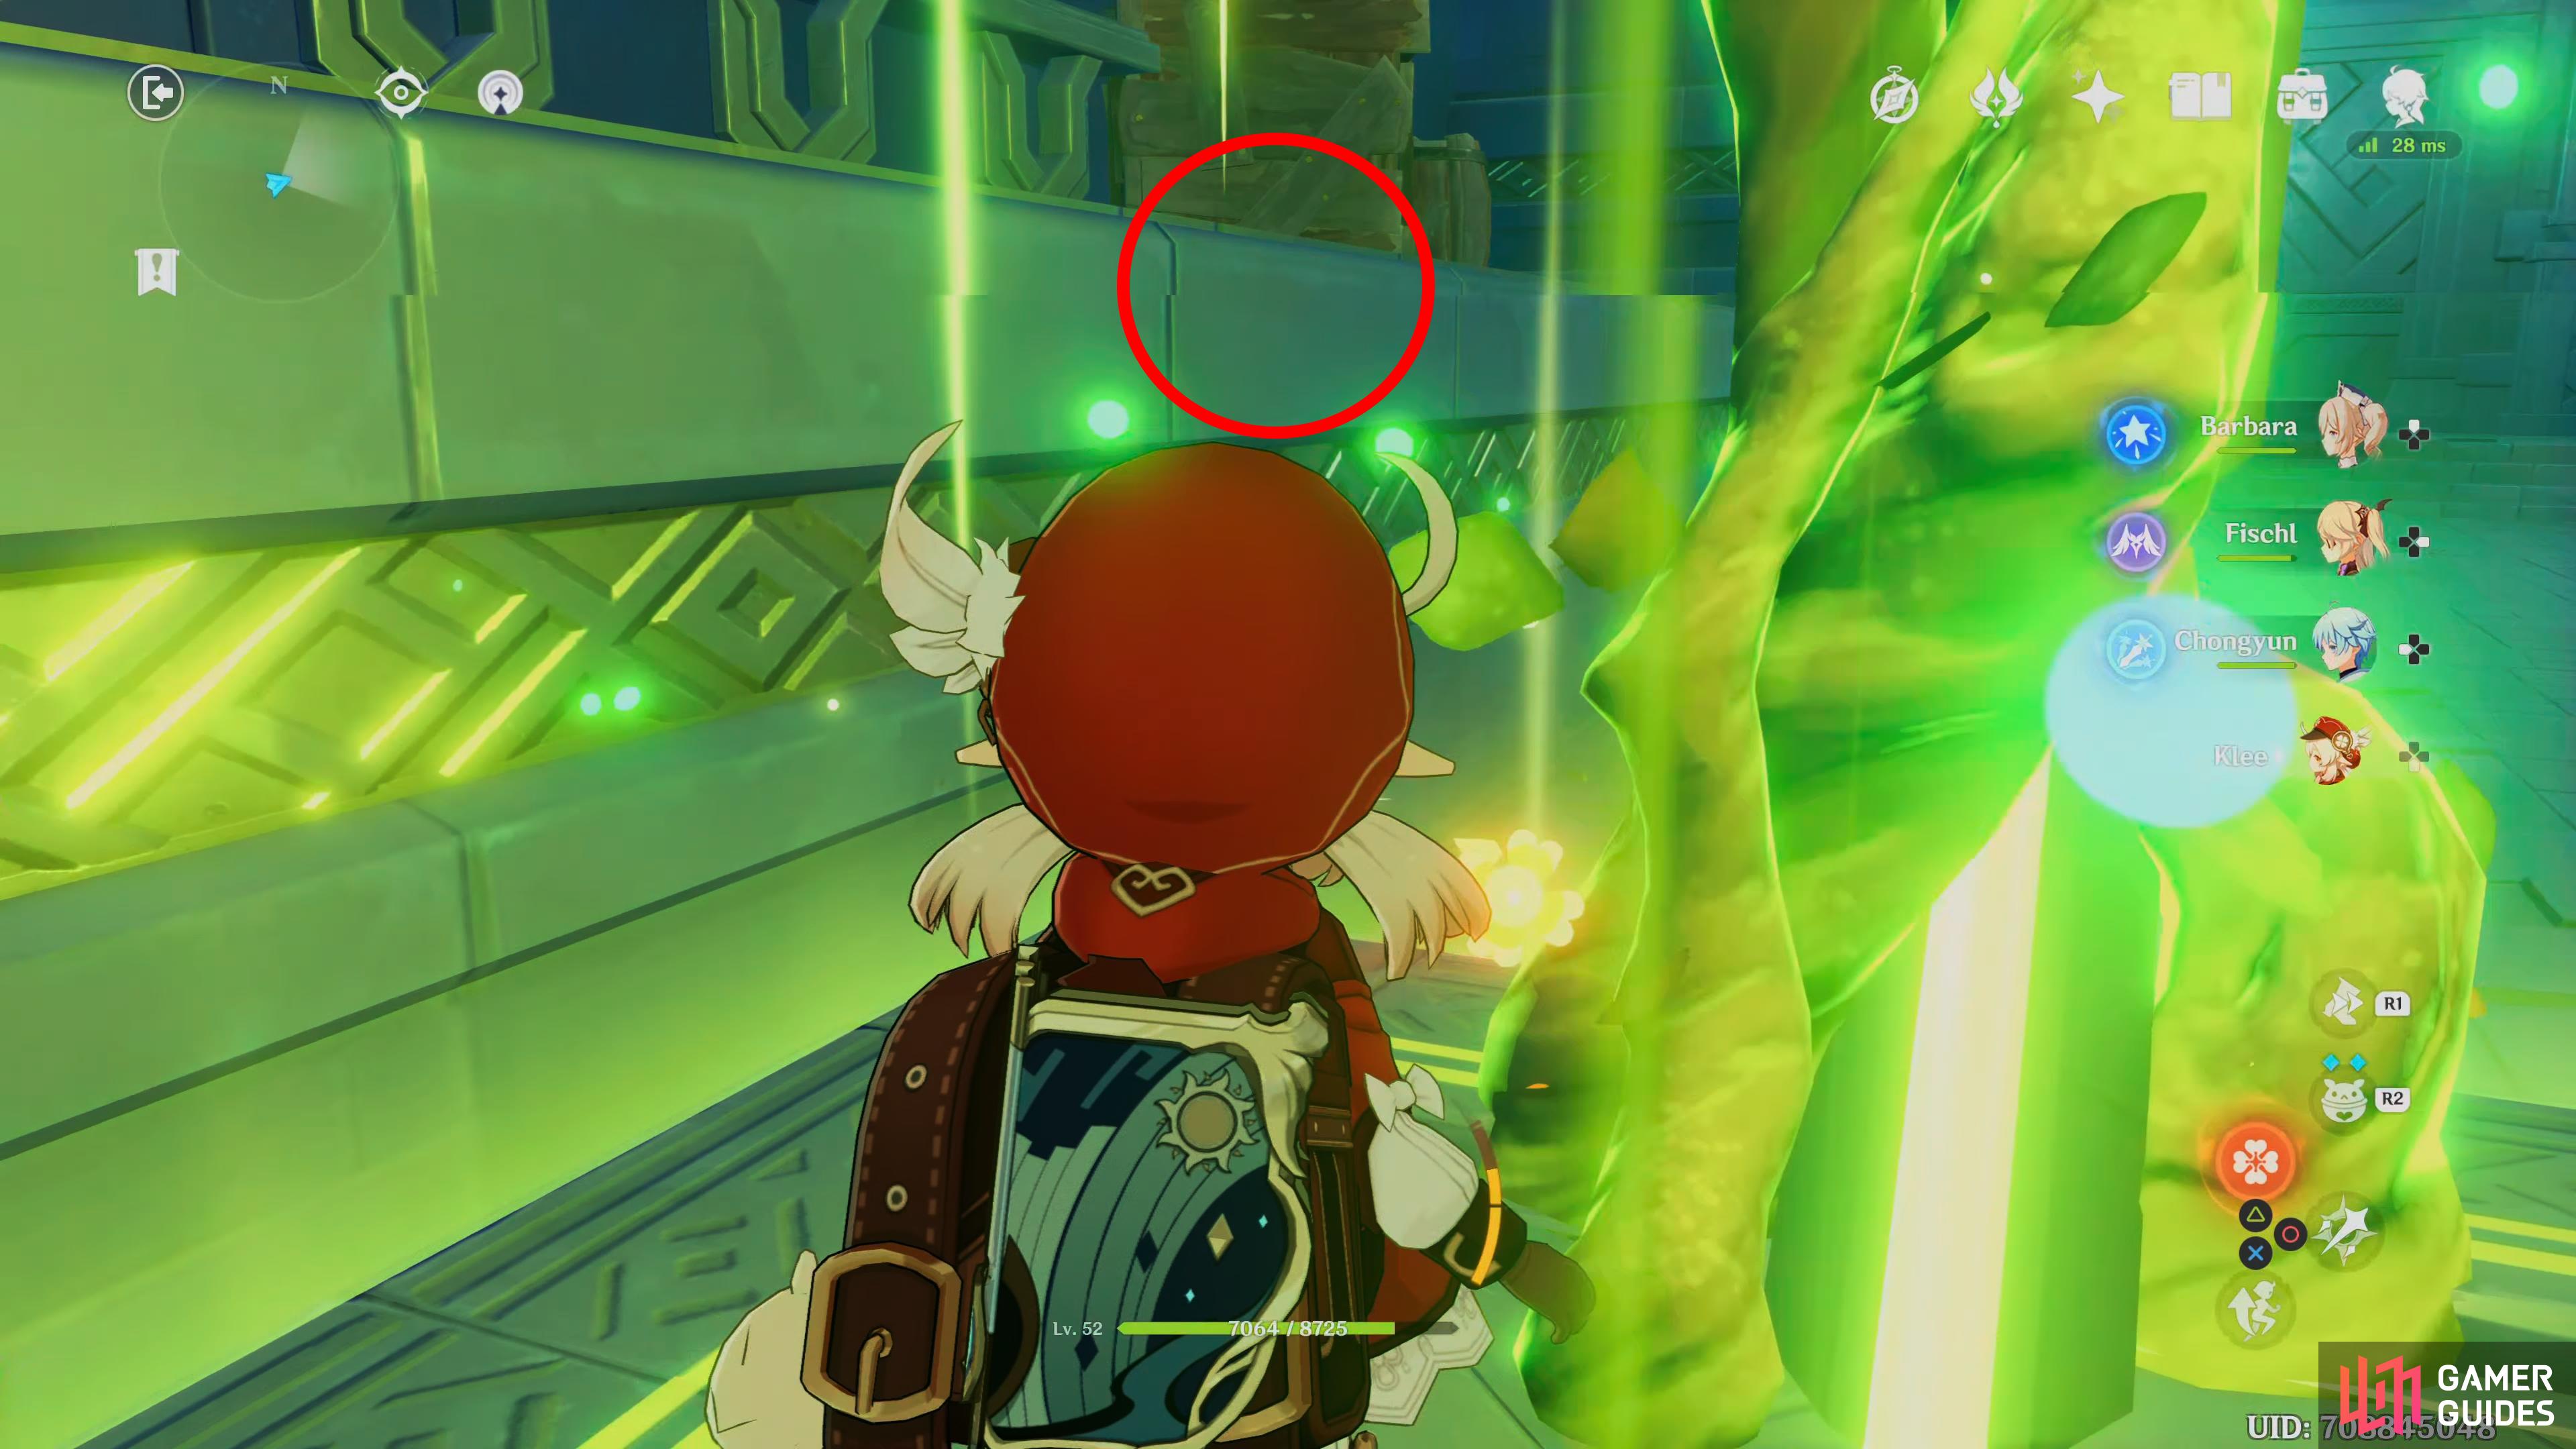 If you jump towards the red circle in the image you can get up to the ledge